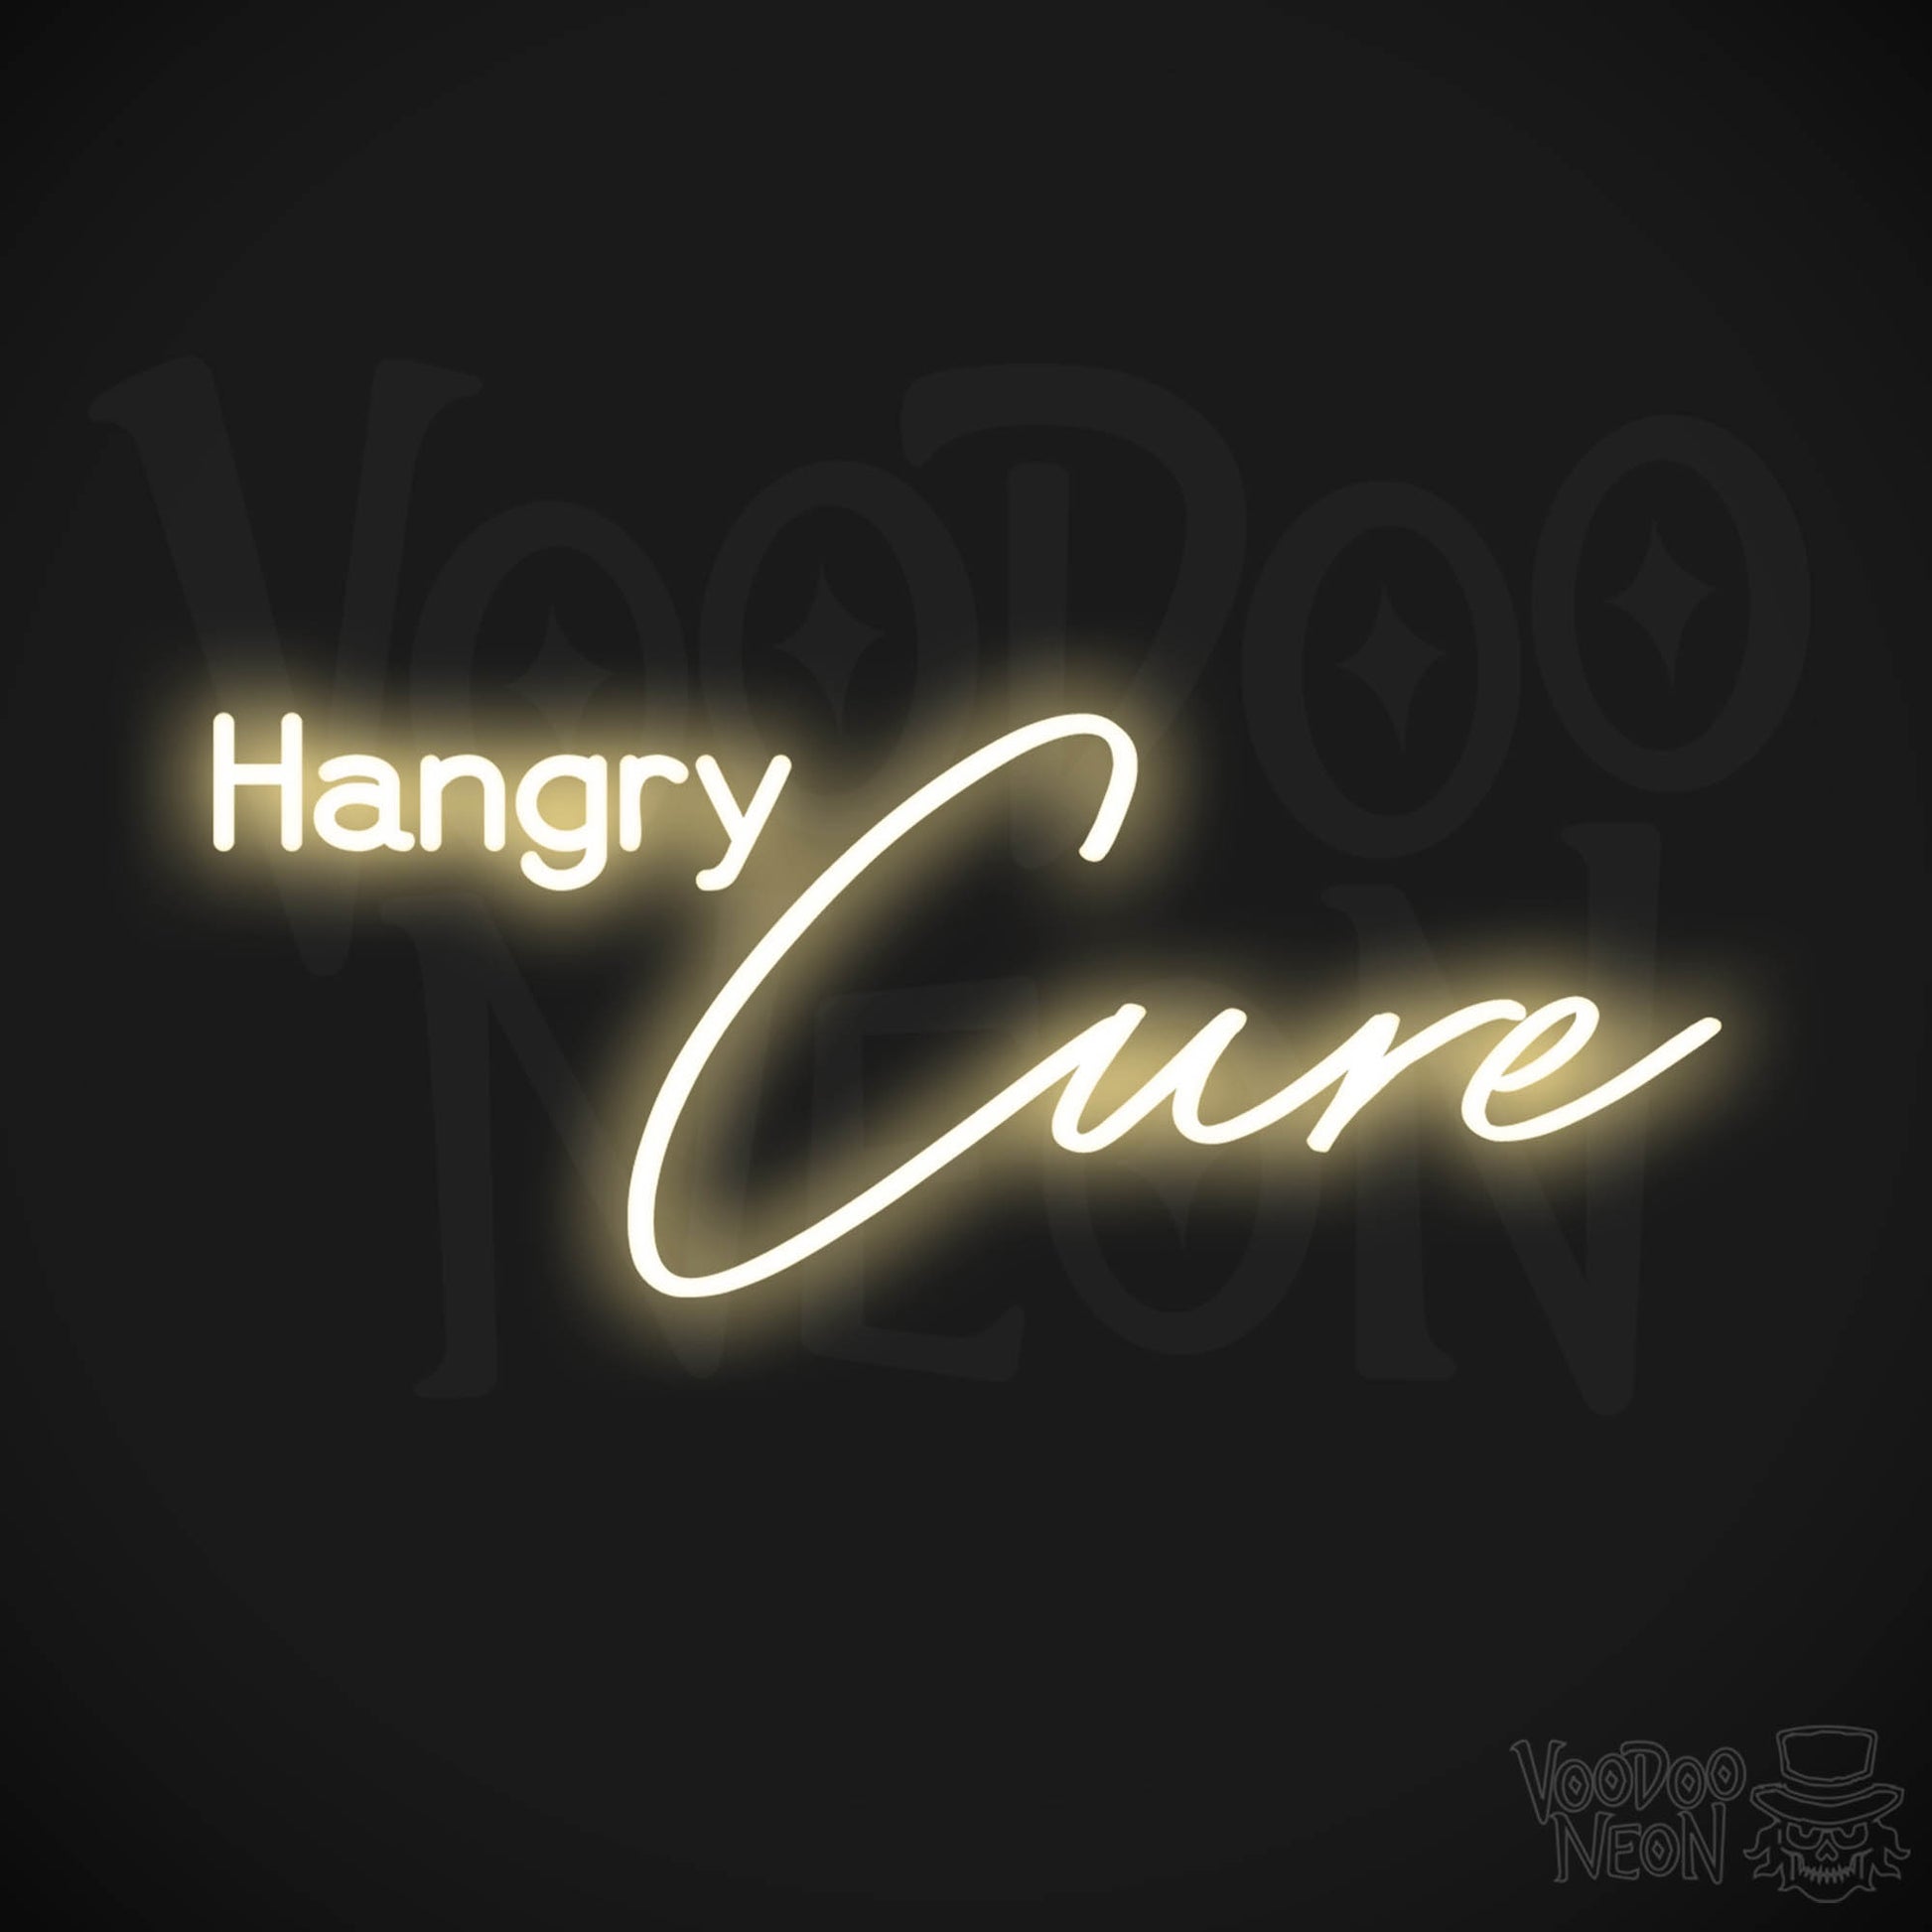 Hangry Cure LED Neon - Warm White